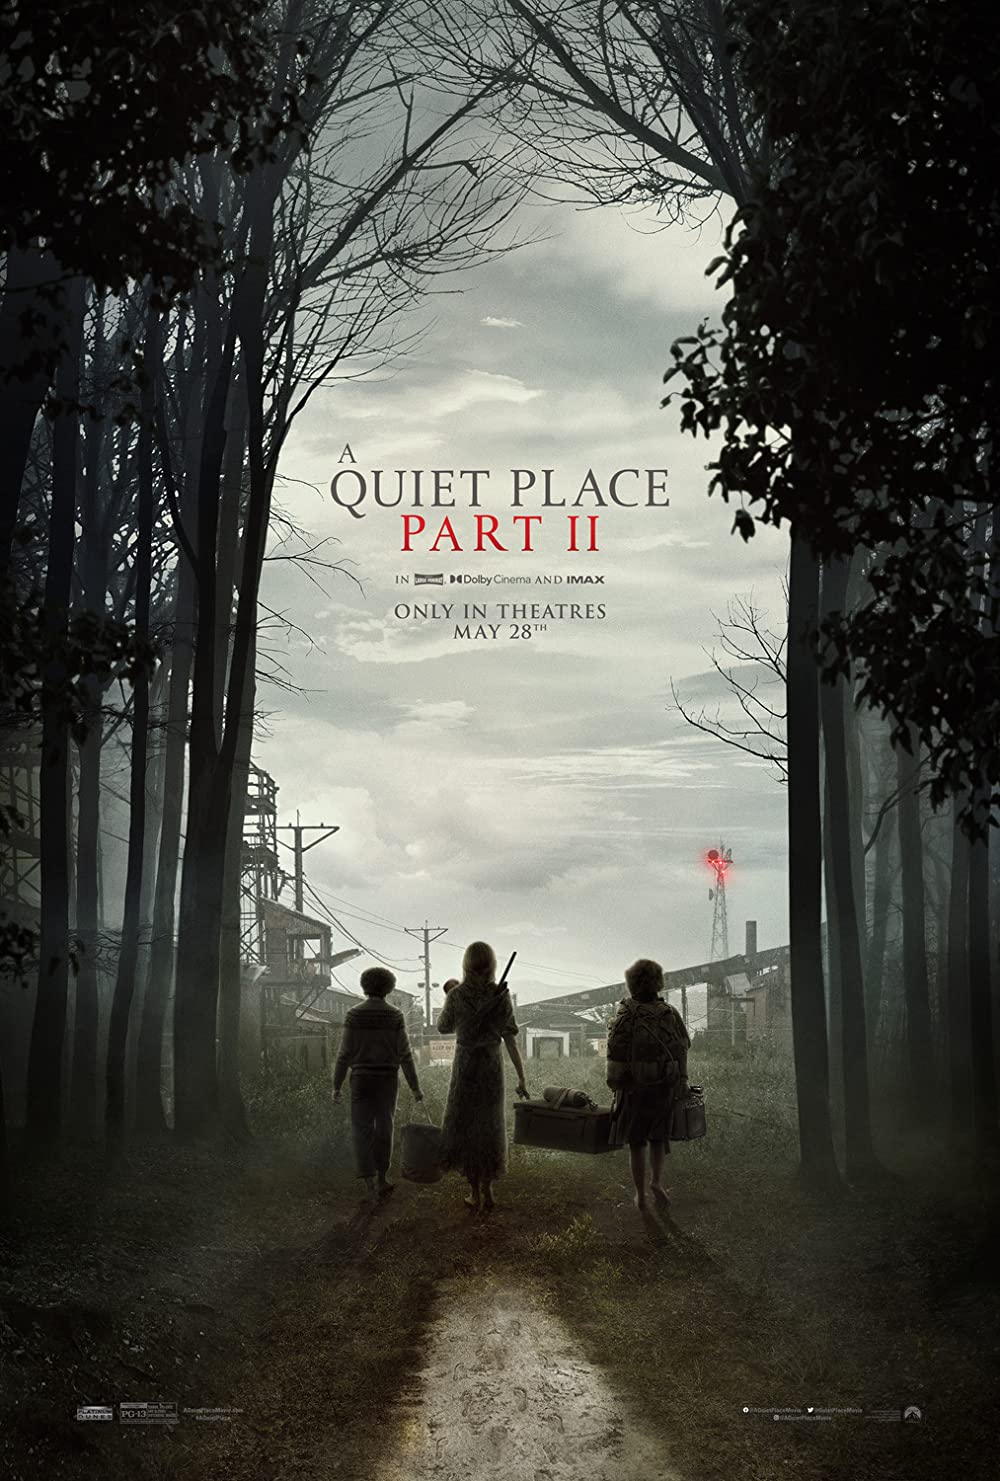 A Quiet Place Part II Tuesday Special @ O'Brien Theatre in Renfrew